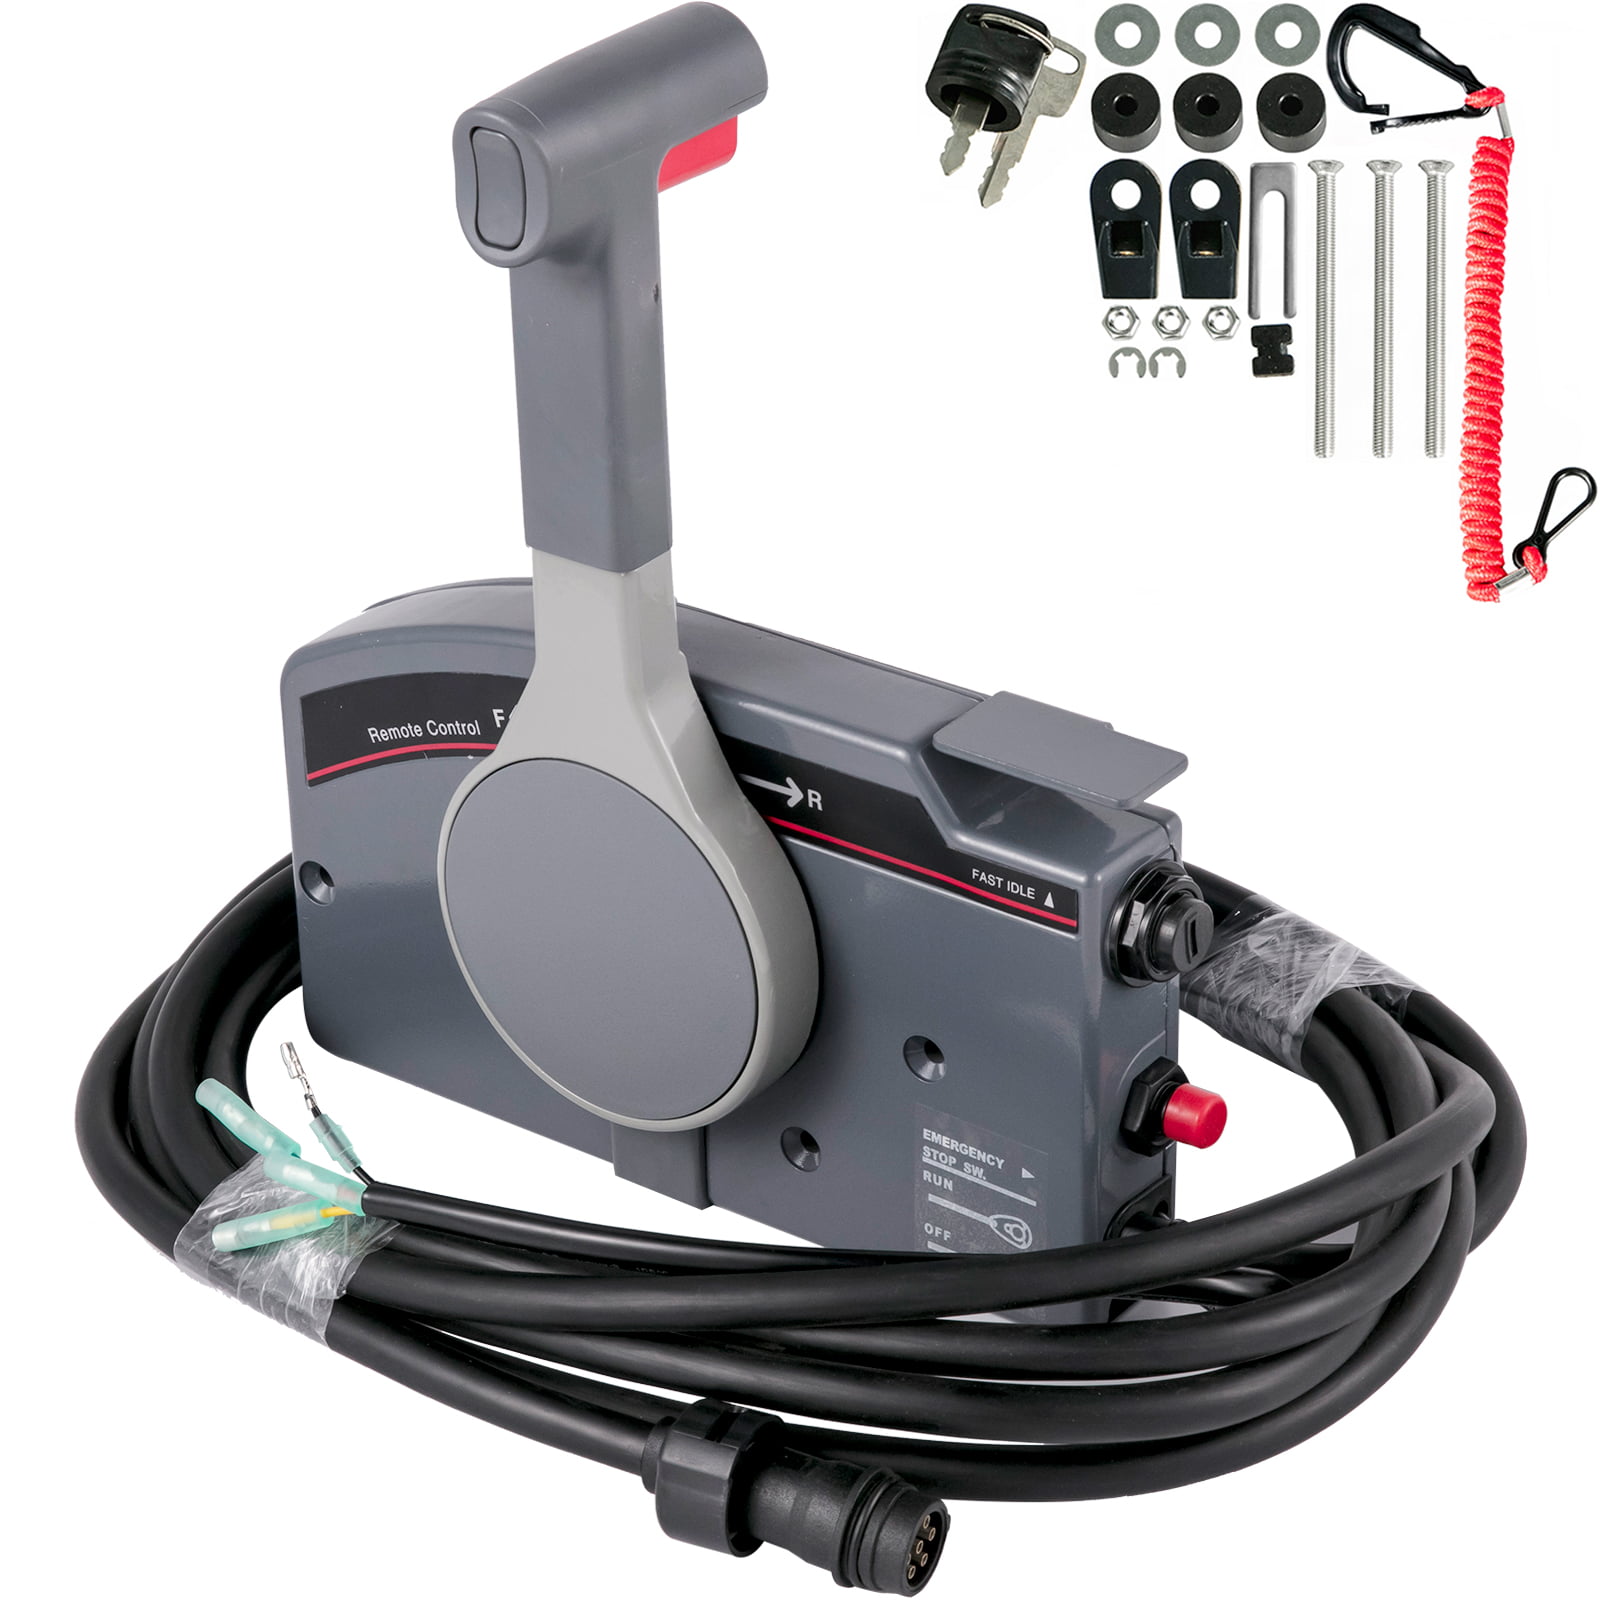 VEVOR Outboard Remote Control Box Adjustable Throttle Friction Side Mount Outboard Motor for 703 Yamaha Outboards Push Throttle 10 Pin Cable 16 Feet Harness OEM 703-48205-16-00